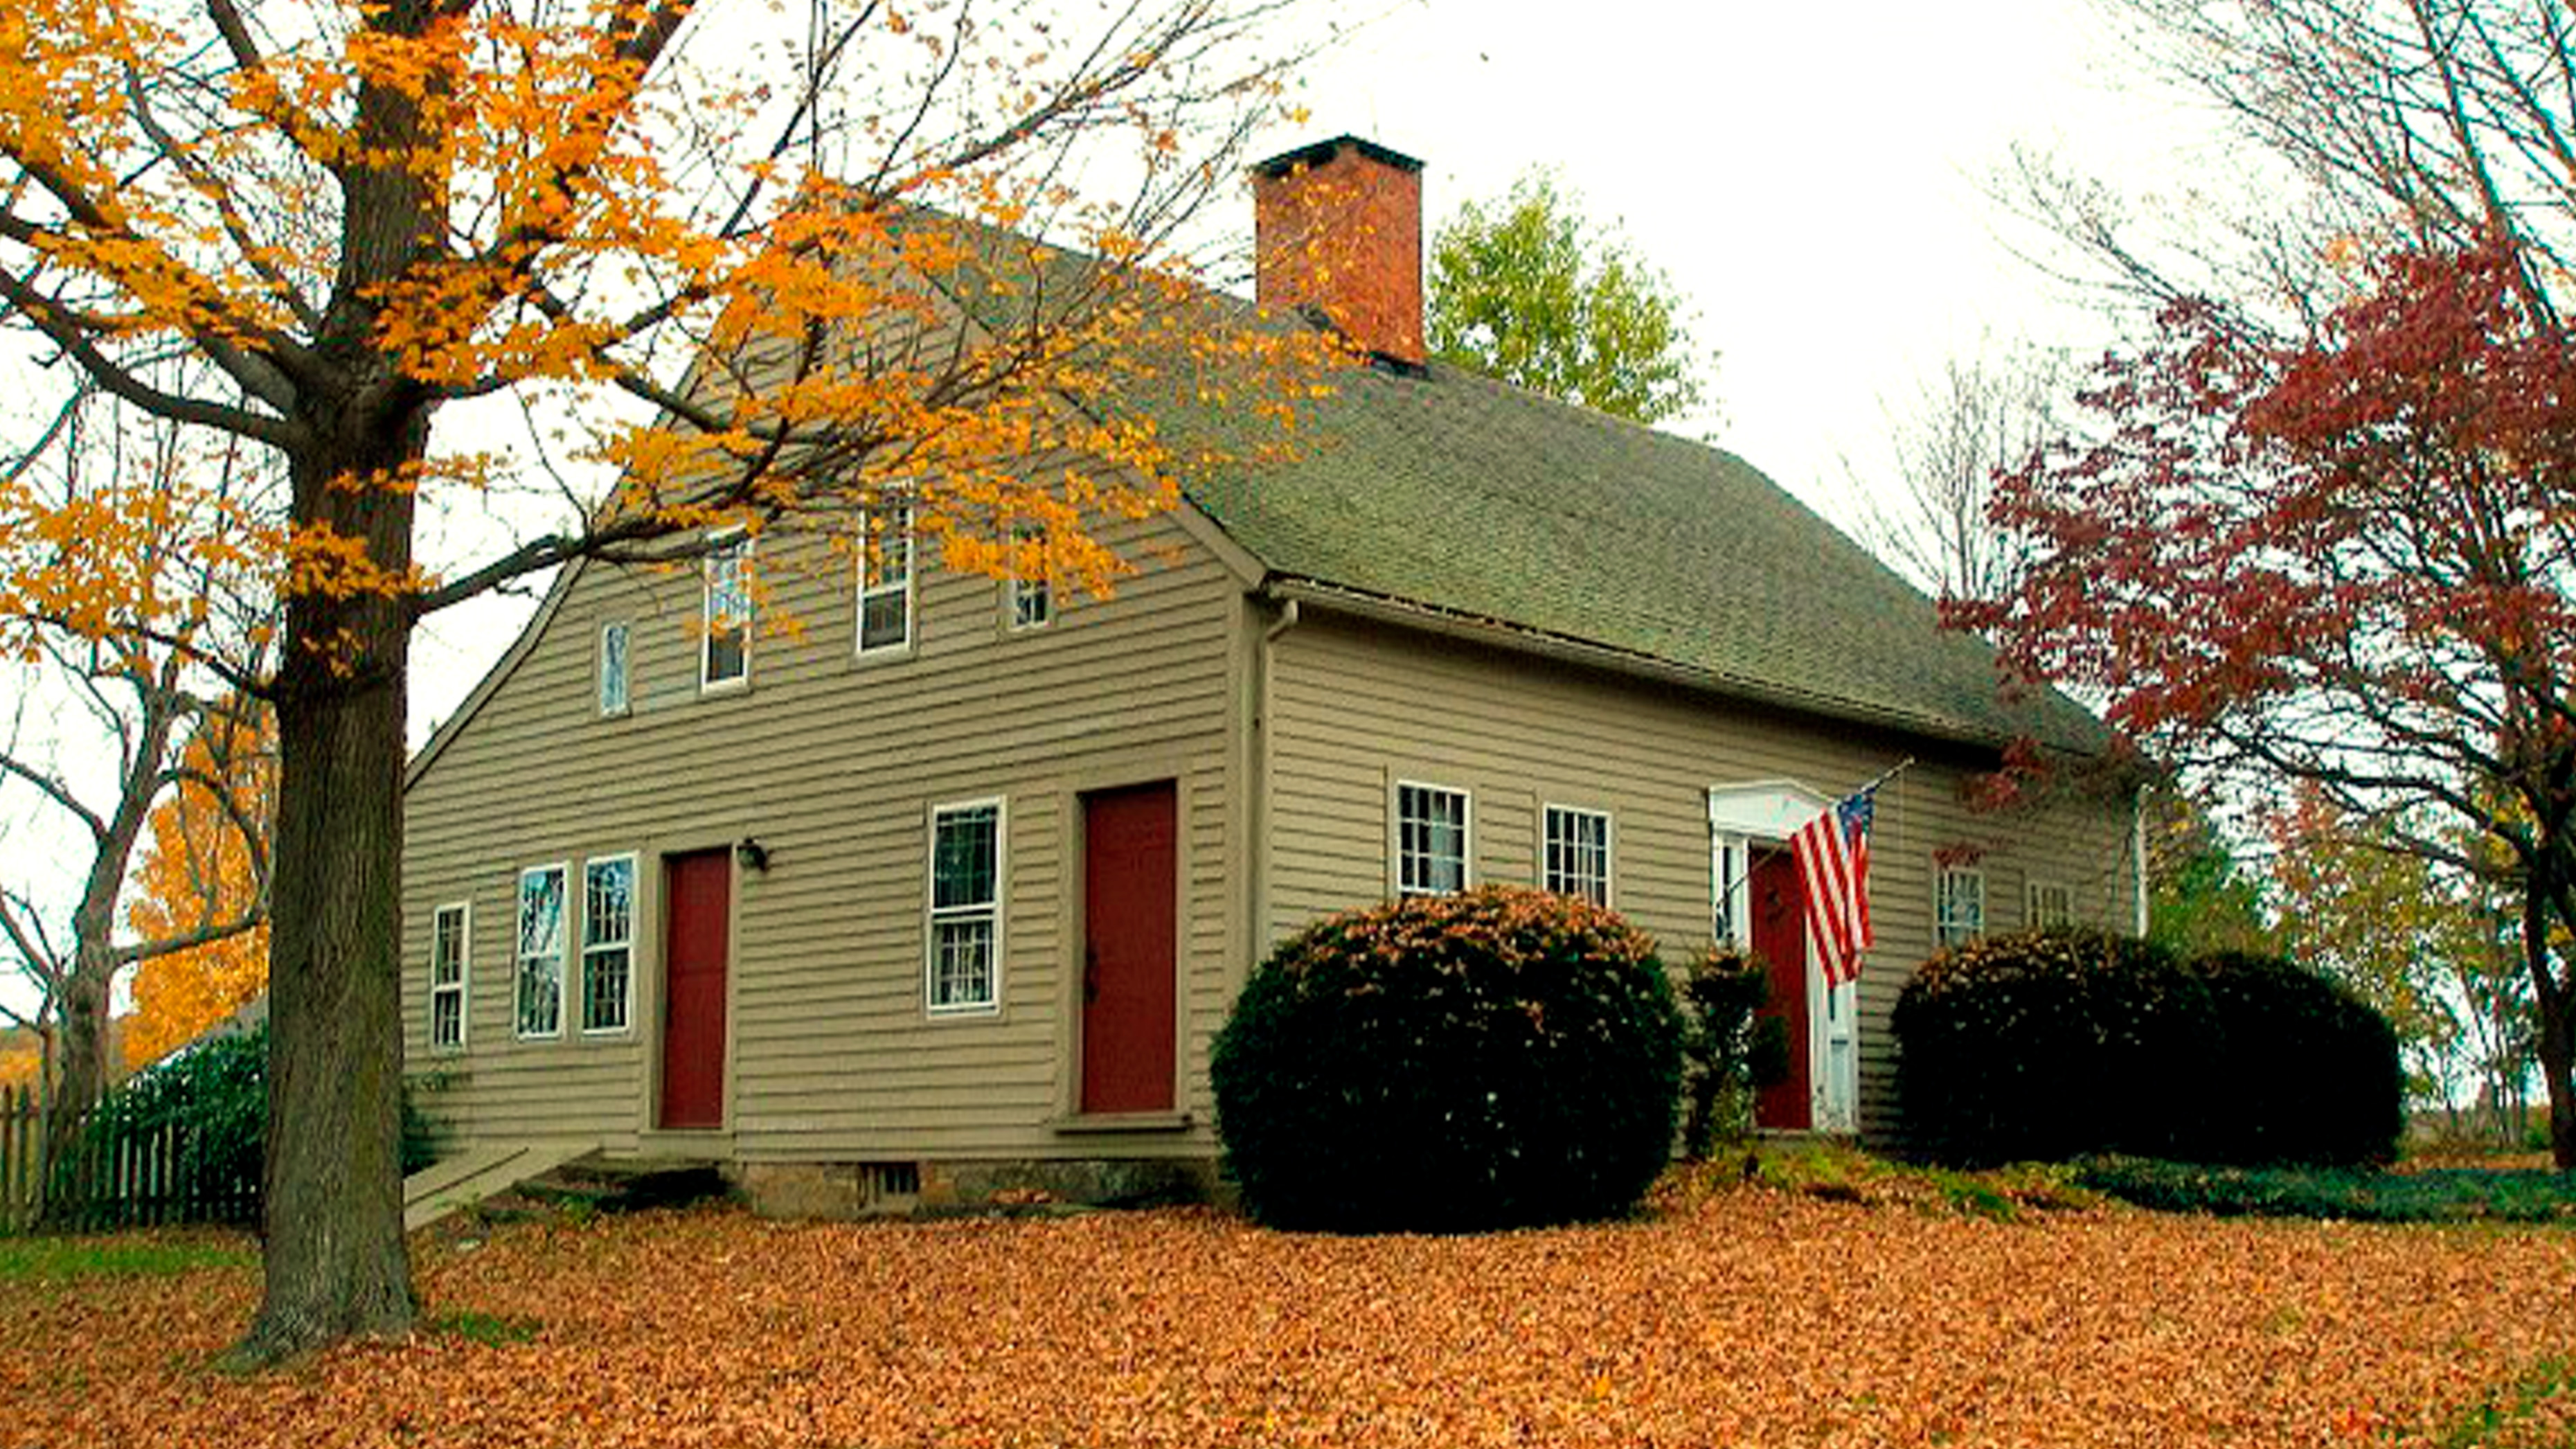 Leaves on the front lawn of the Roderick Bryan House in Watertown, CT